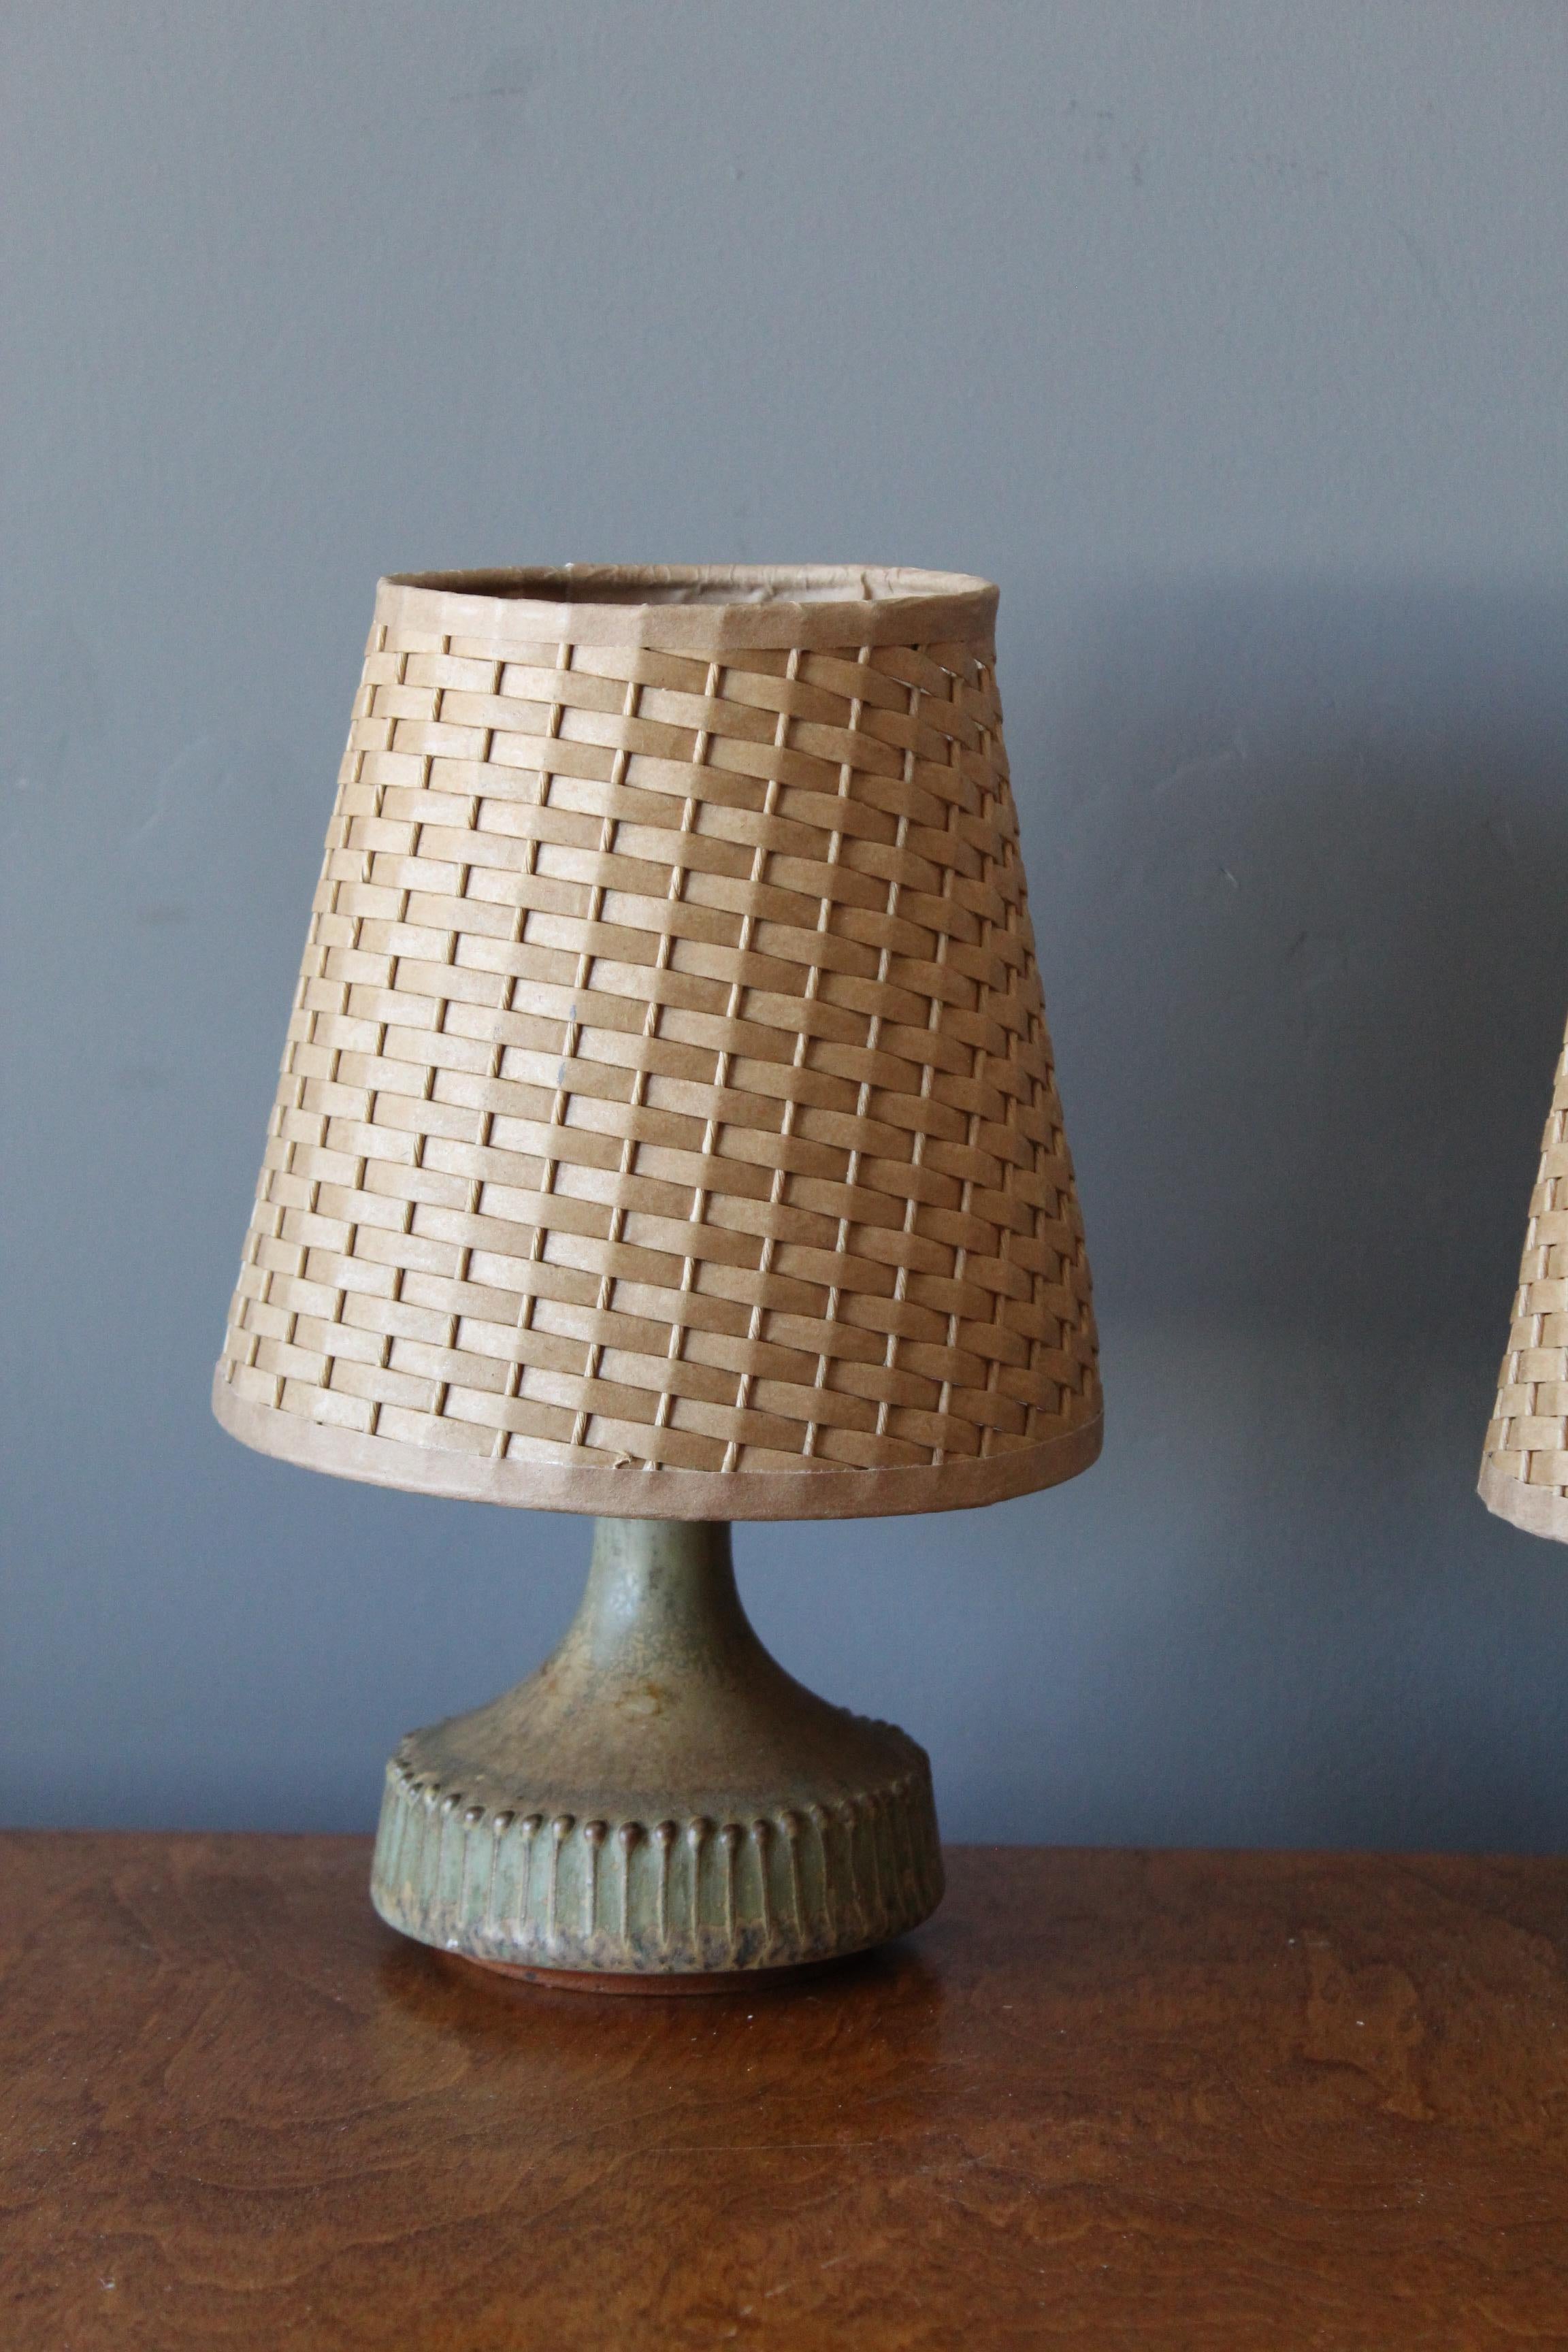 Swedish Rolf Palm, Small Table Lamps, Glazed Stoneware, Rattan, Mölle, Sweden, 1960s